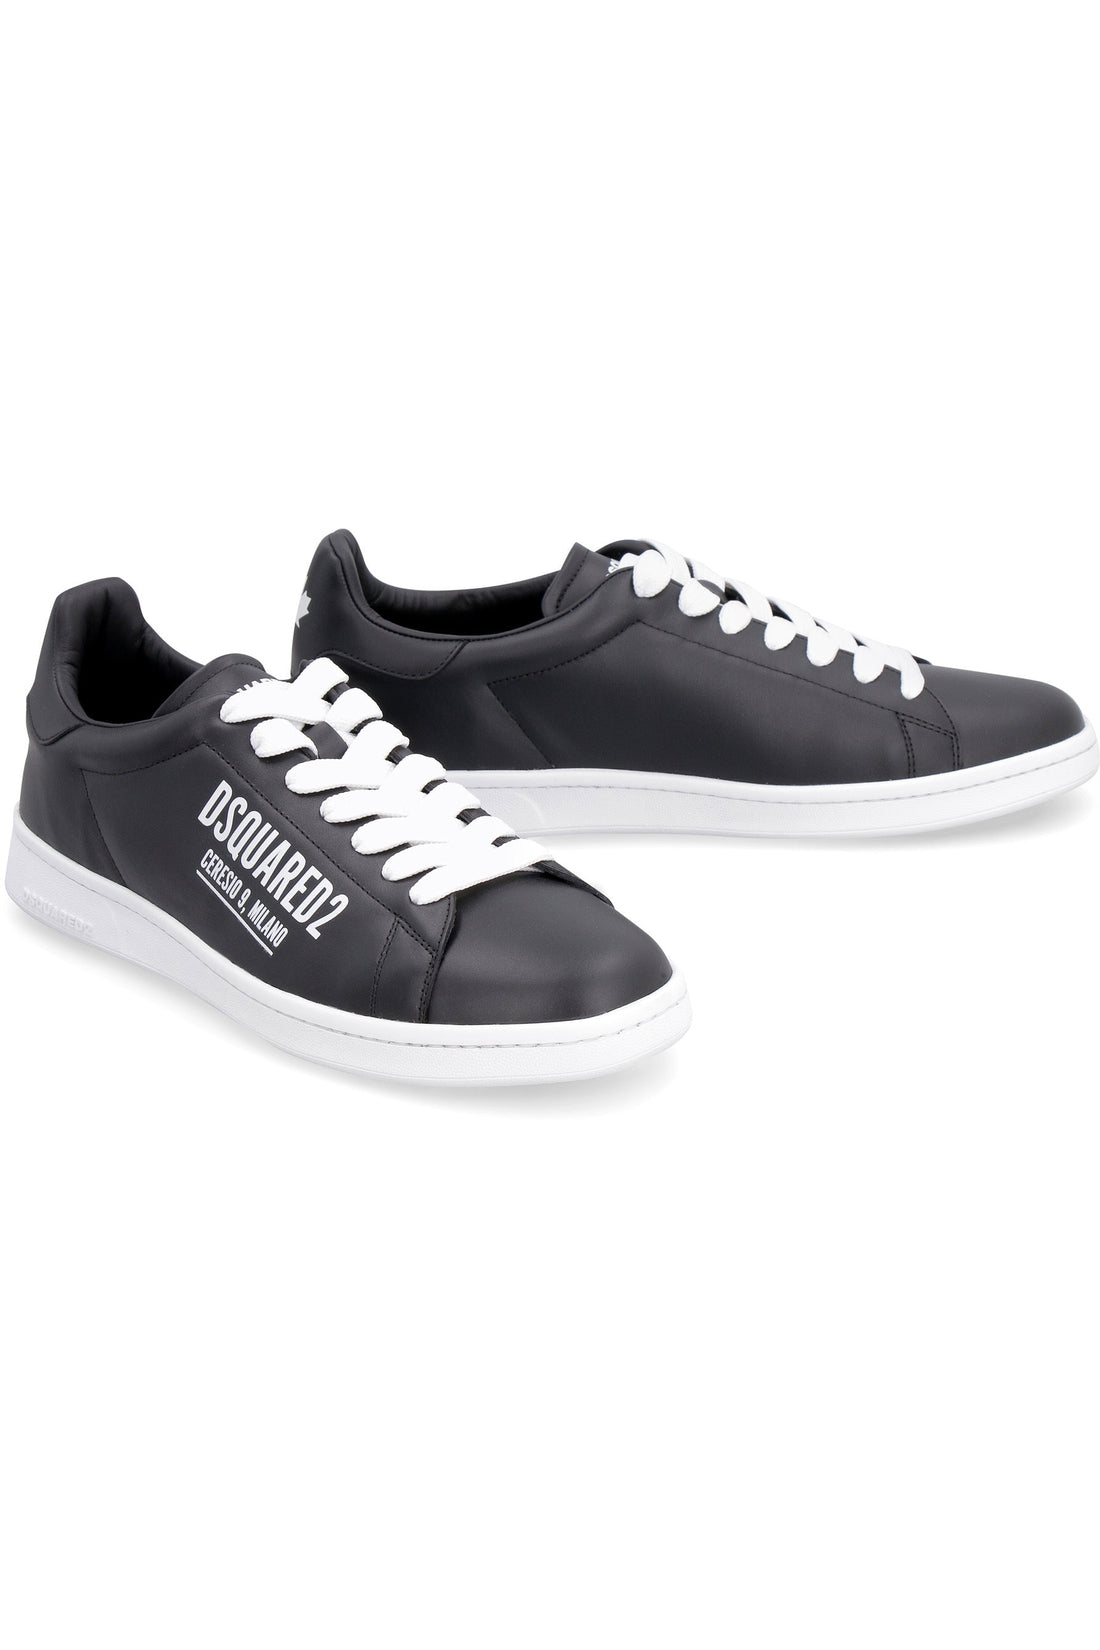 Dsquared2-OUTLET-SALE-Boxer leather low-top sneakers-ARCHIVIST